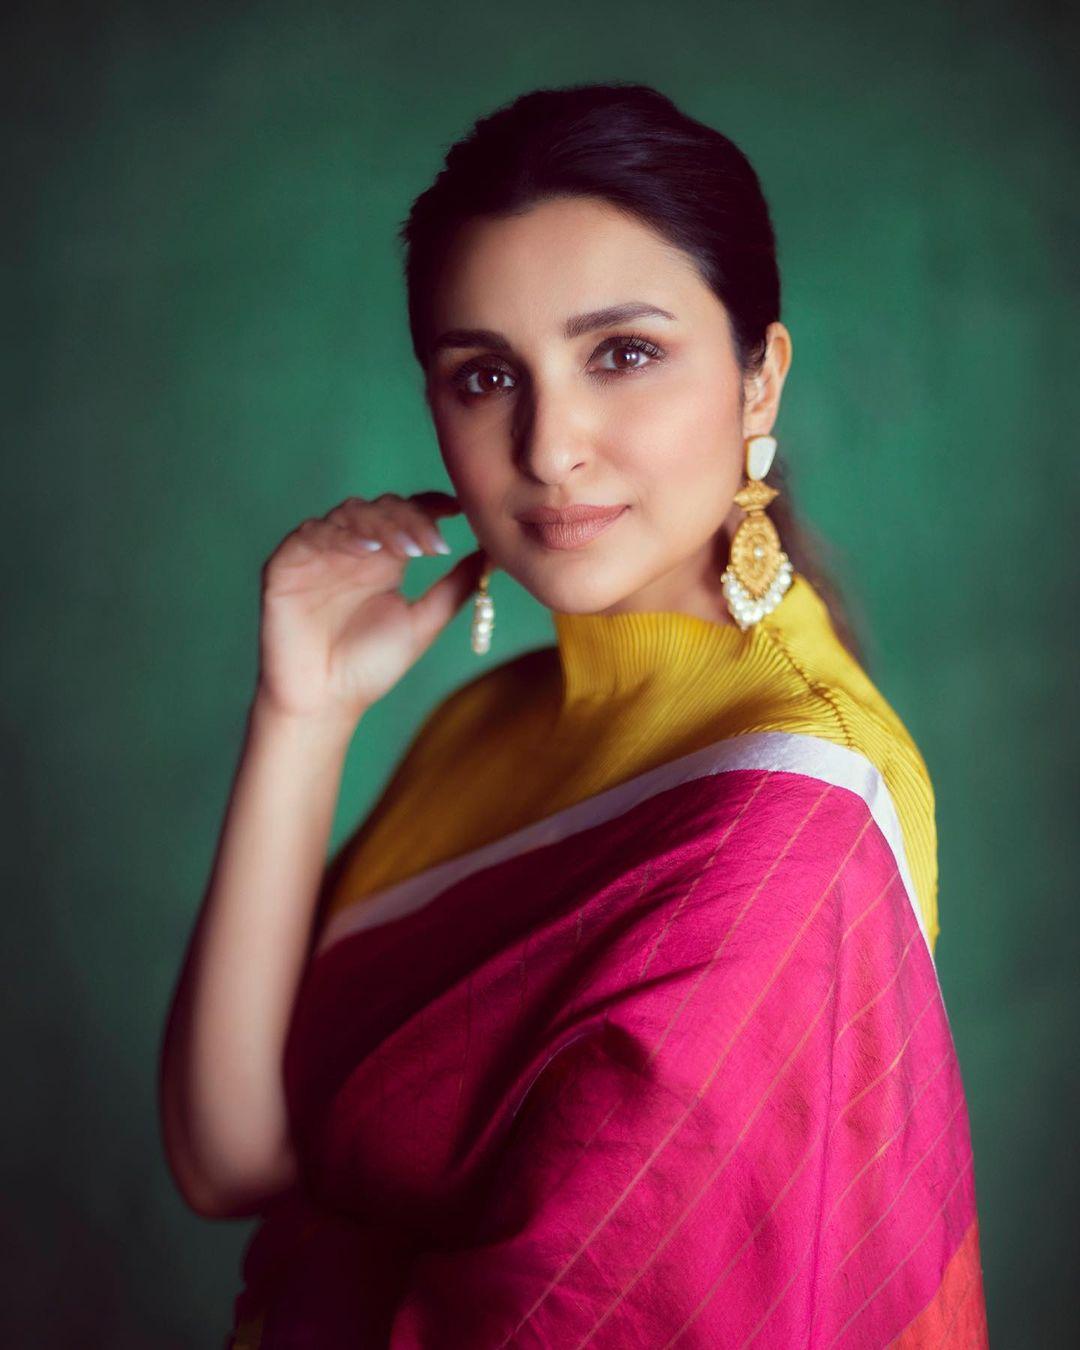 The actress adorned herself with intricate earrings and opted for minimal makeup as she gracefully posed for the camera